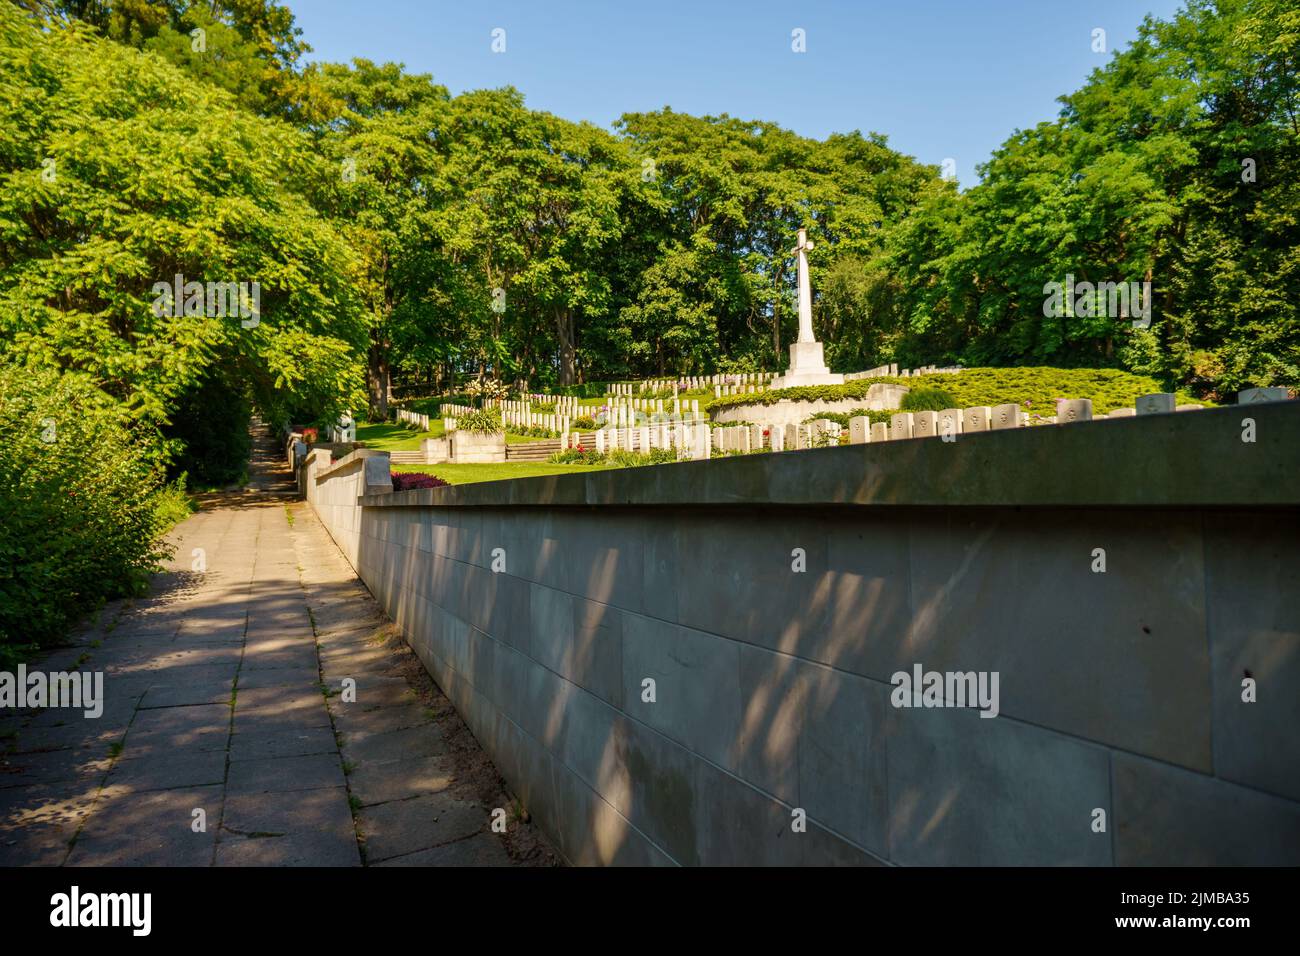 A footpath leading to the second world war graveyard with fallen soldiers in the Cytadela park Stock Photo